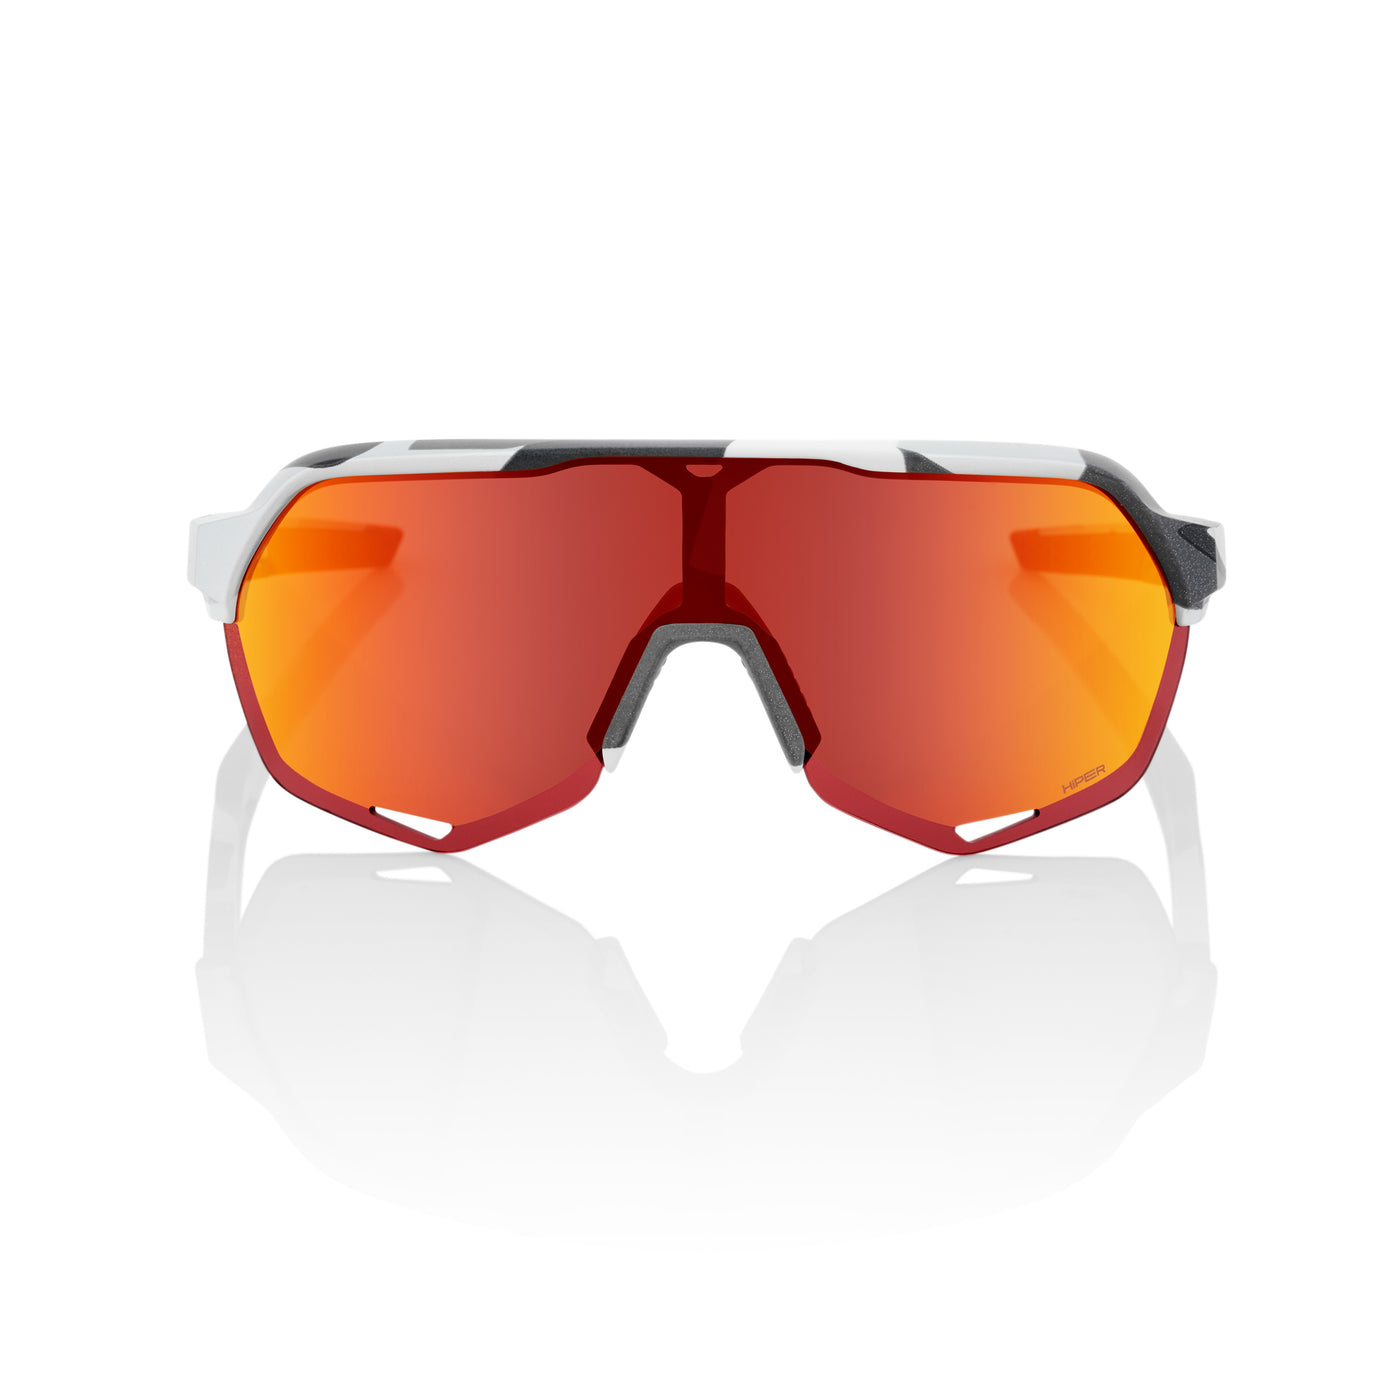 S2  Soft Tact Grey Camo - HiPER Red Multilayer Mirror Lens